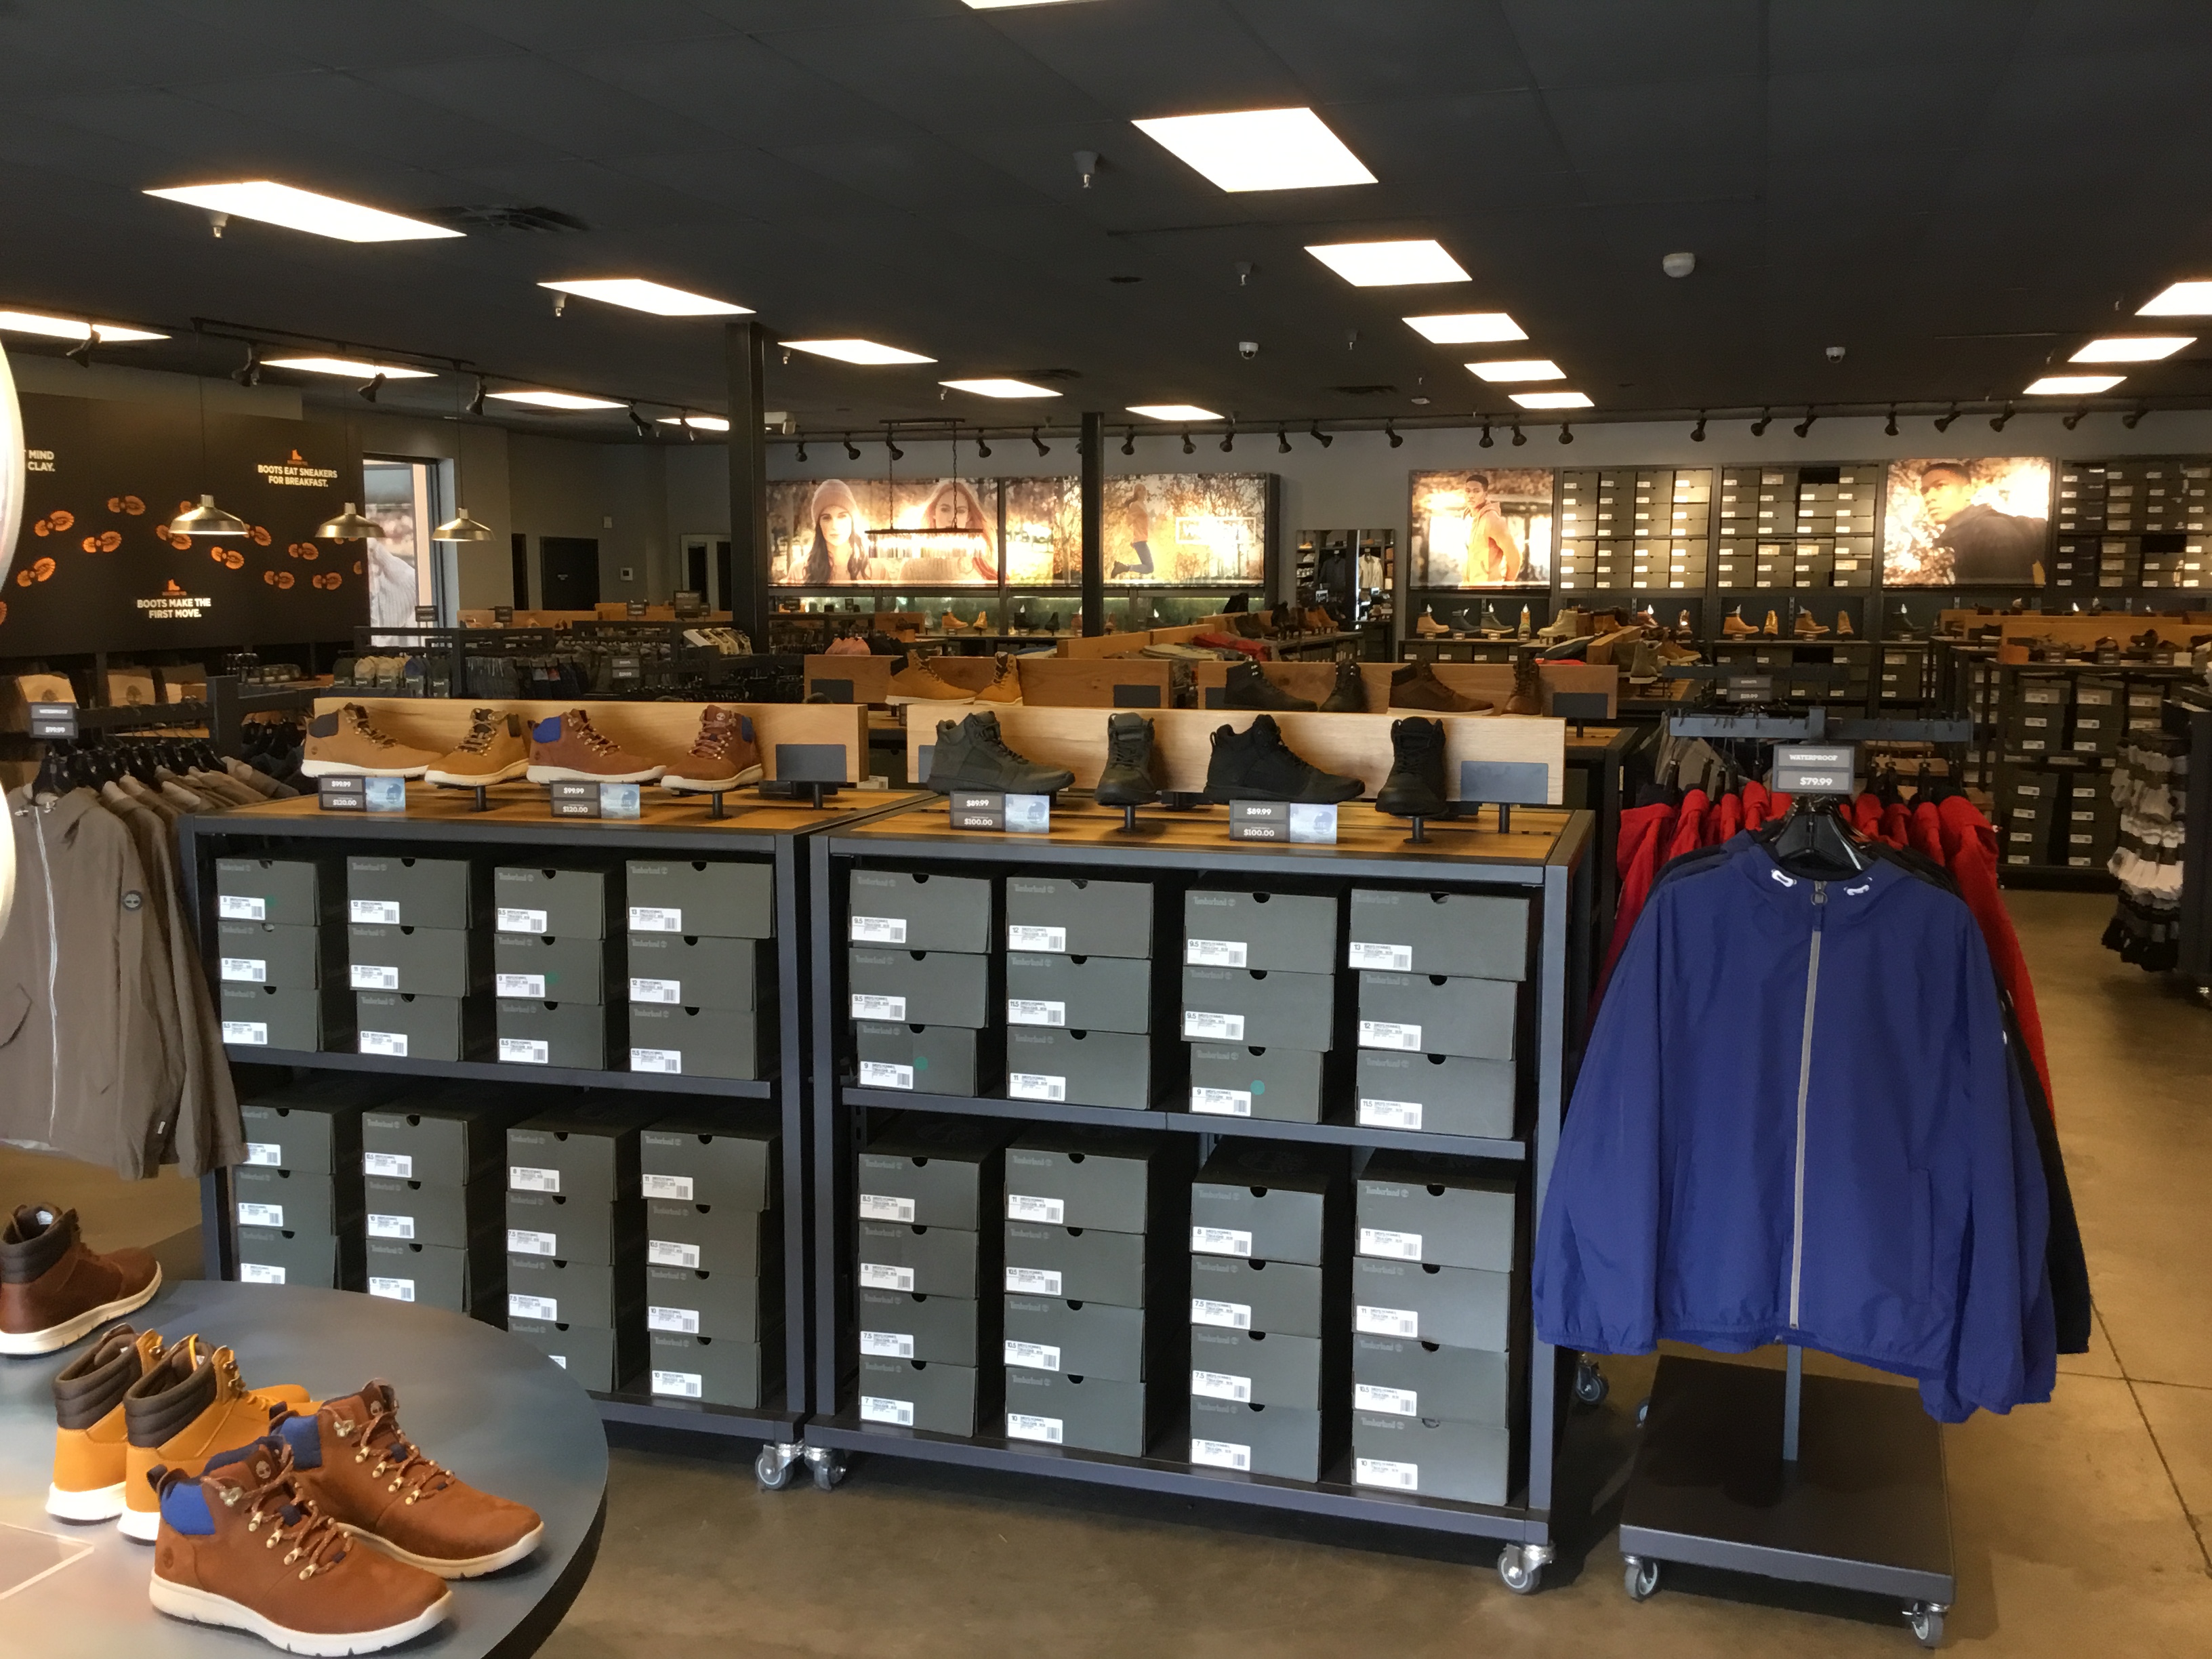 Timberland - Boots, Clothing & Accessories Dawsonville, GA